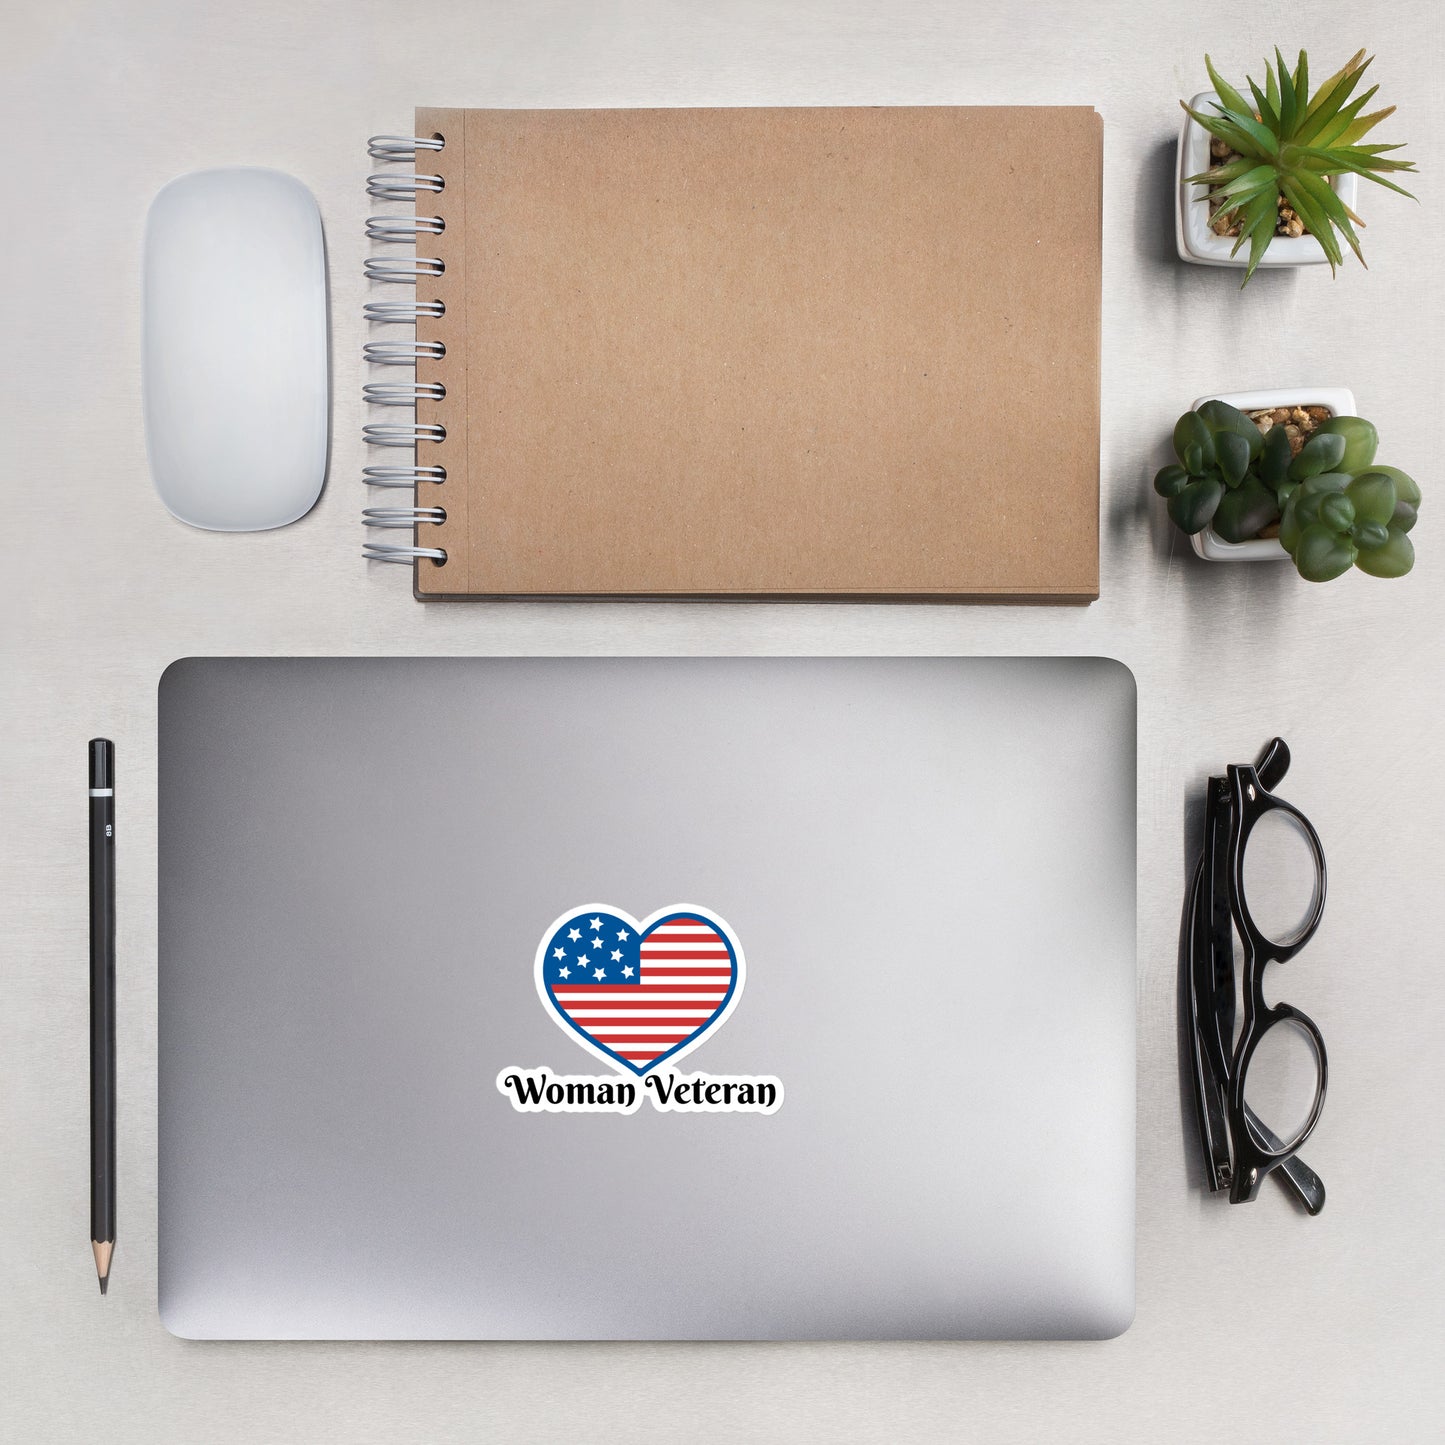 Woman Veteran - Bubble-free stickers - Sew Many Things & More